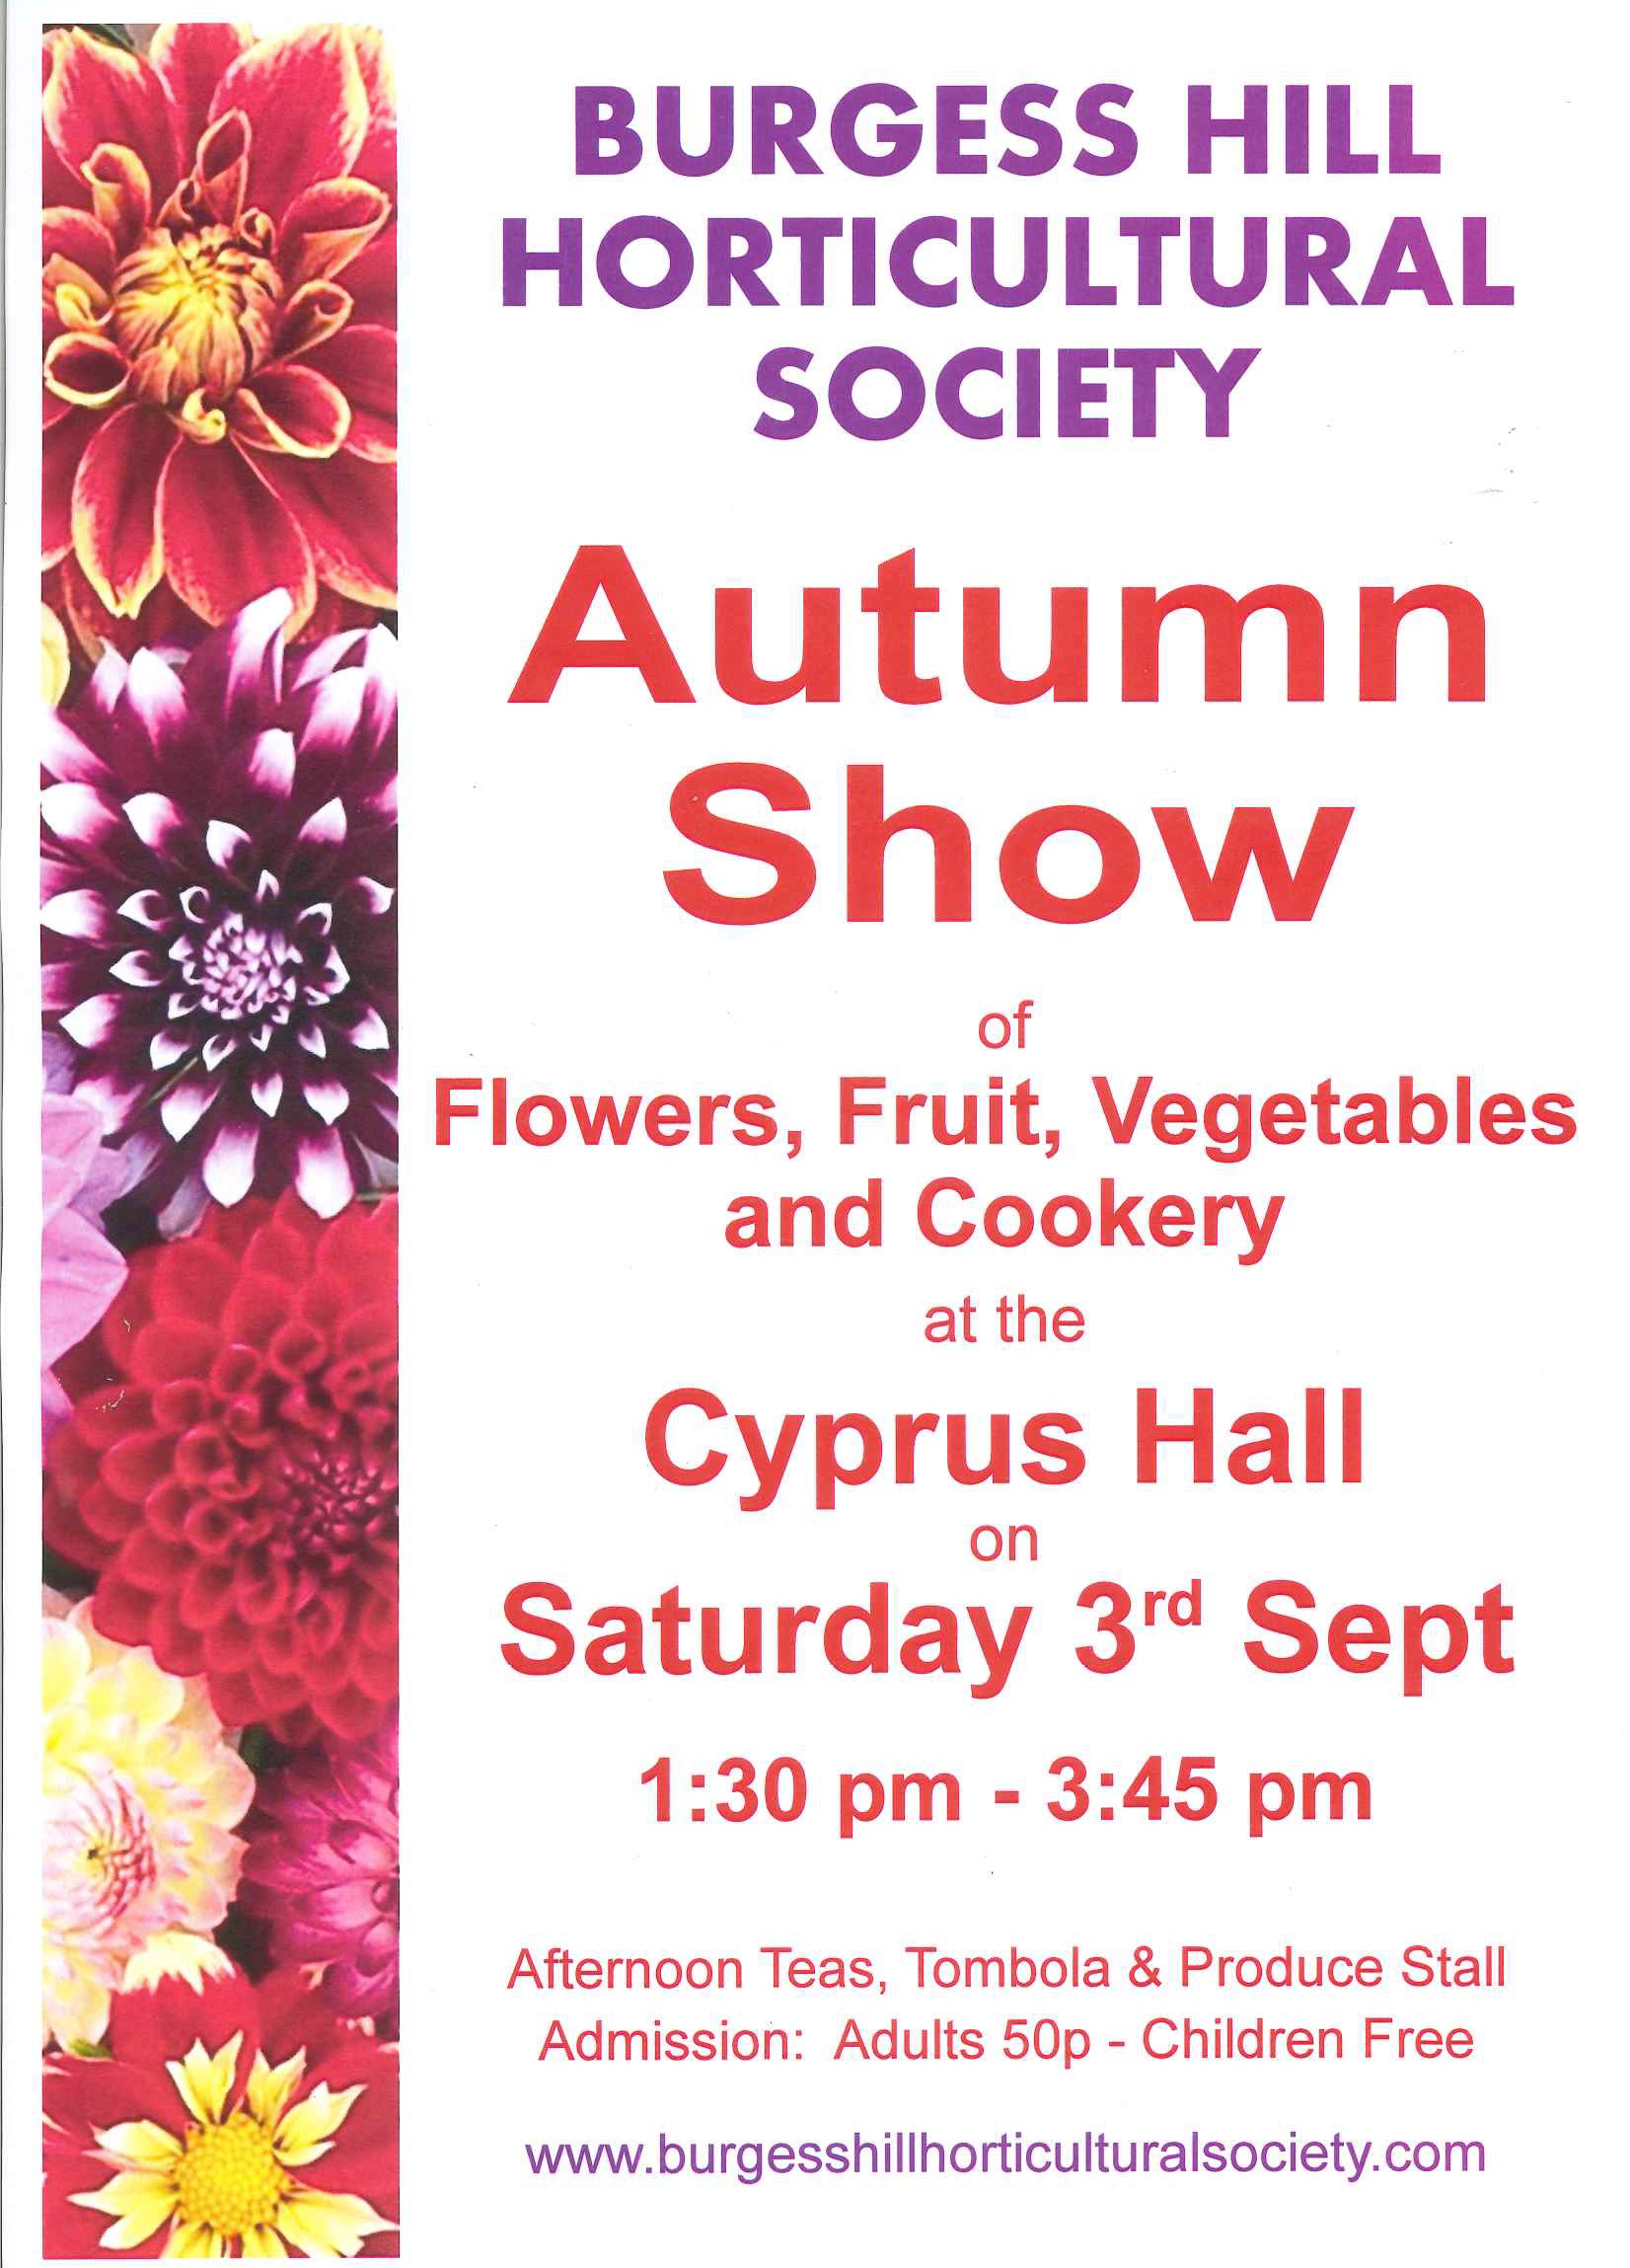 Burgess Hill Horticultural Society